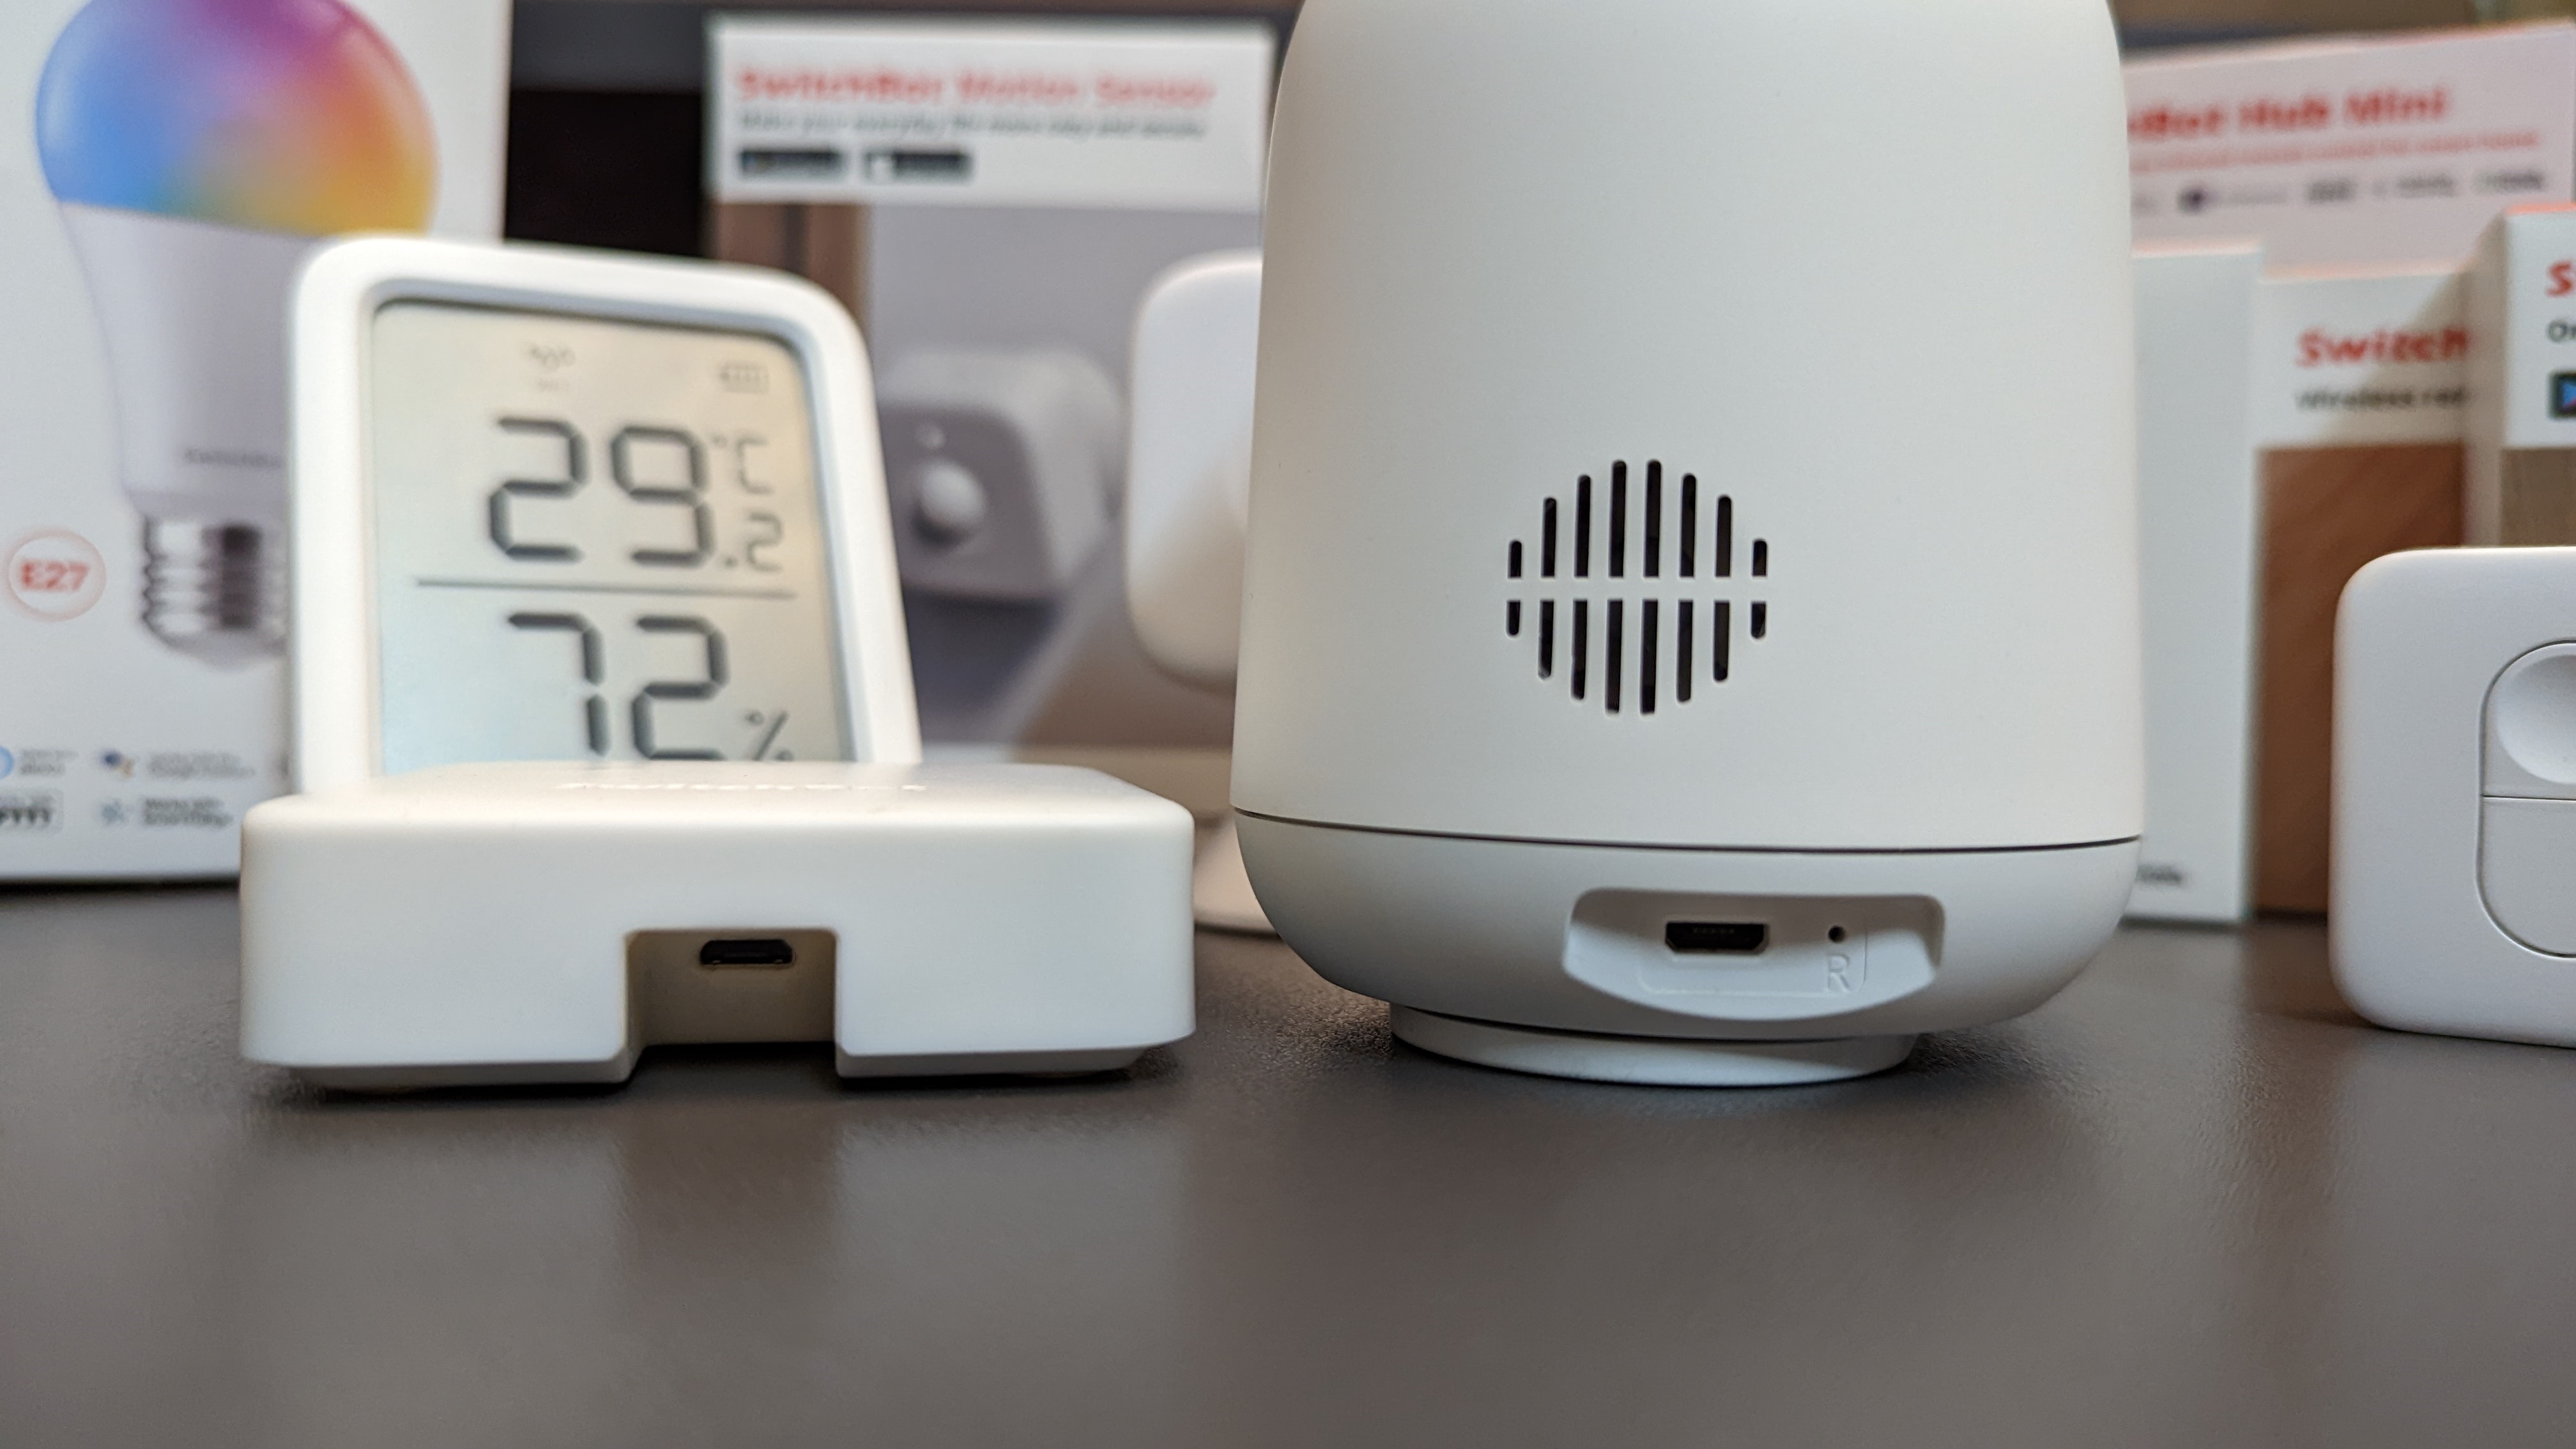 SwitchBot smart home products showcasing their Micro-USB ports